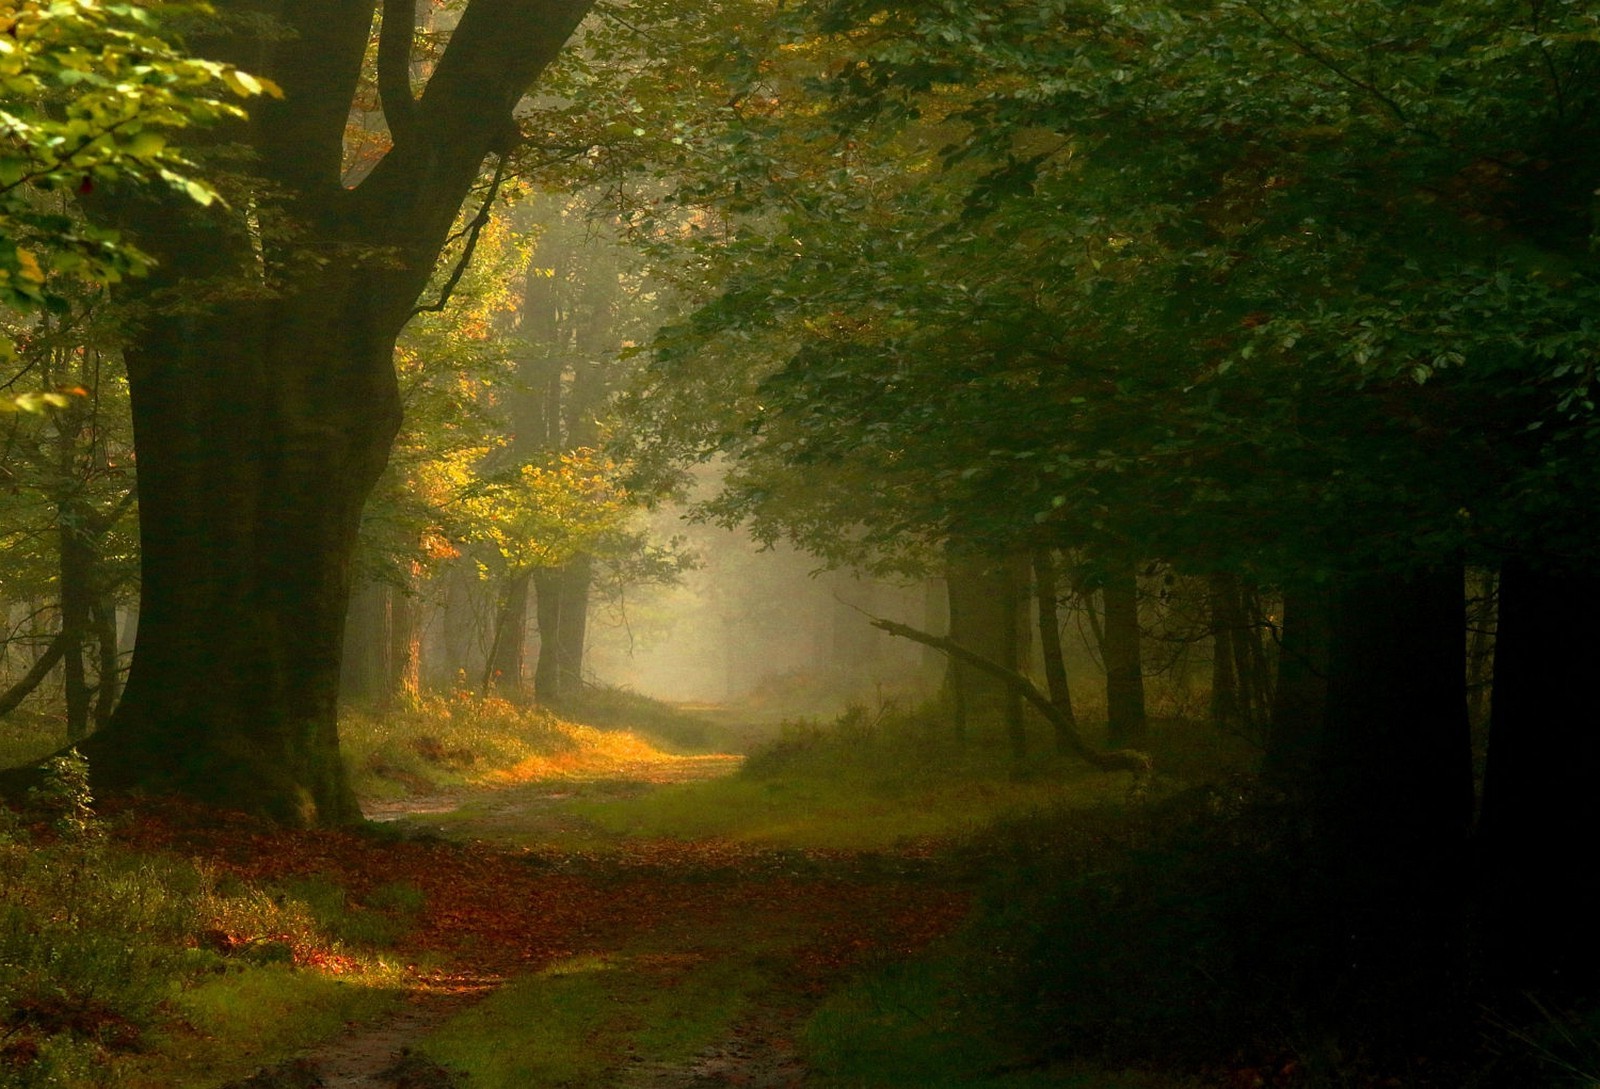 photography, Landscape, Nature, Fairy Tale, Forest, Mist, Path, Sunlight, Trees, Leaves, Netherlands Wallpaper